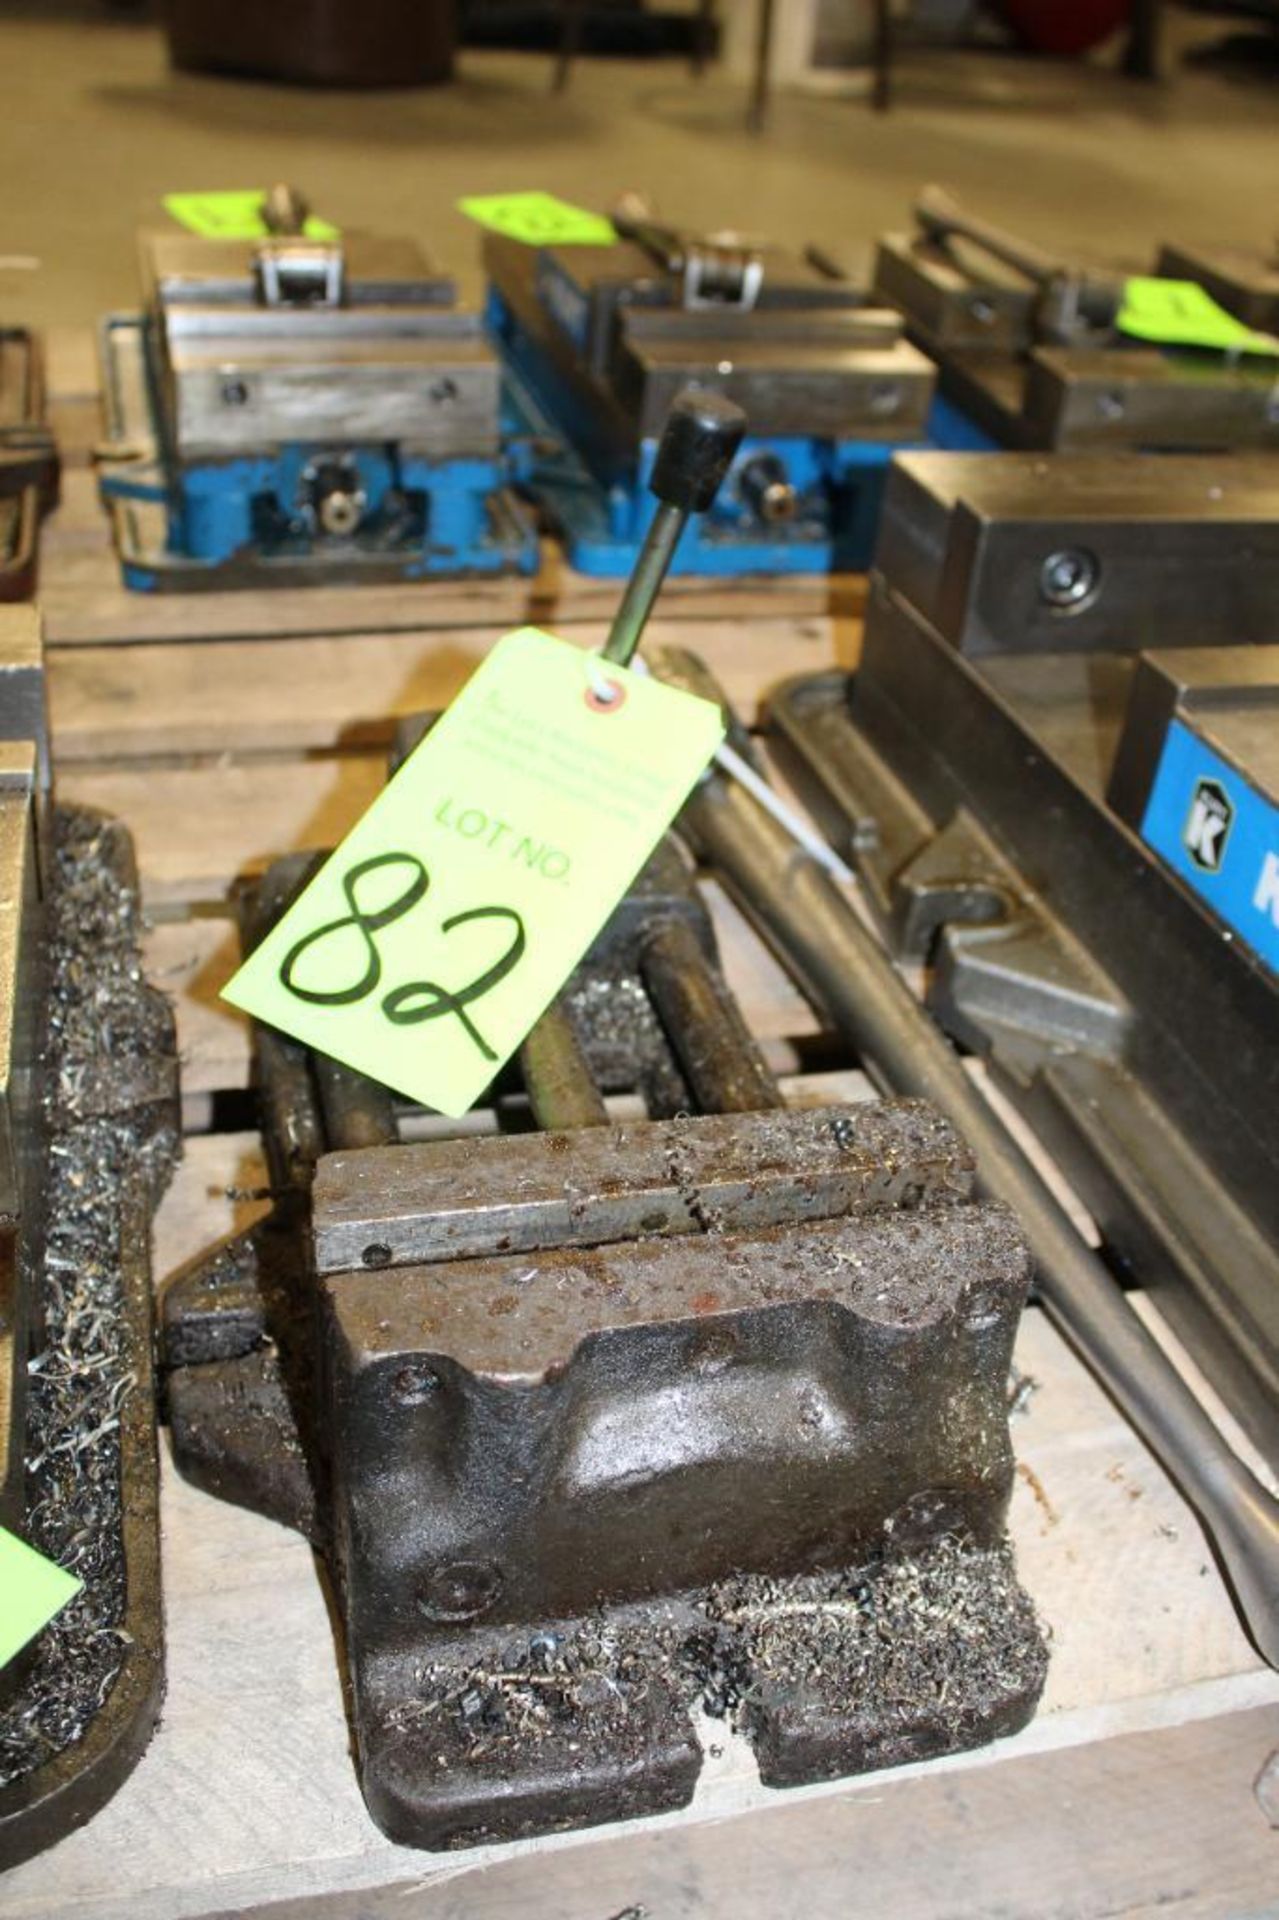 6" Vise - Image 2 of 2